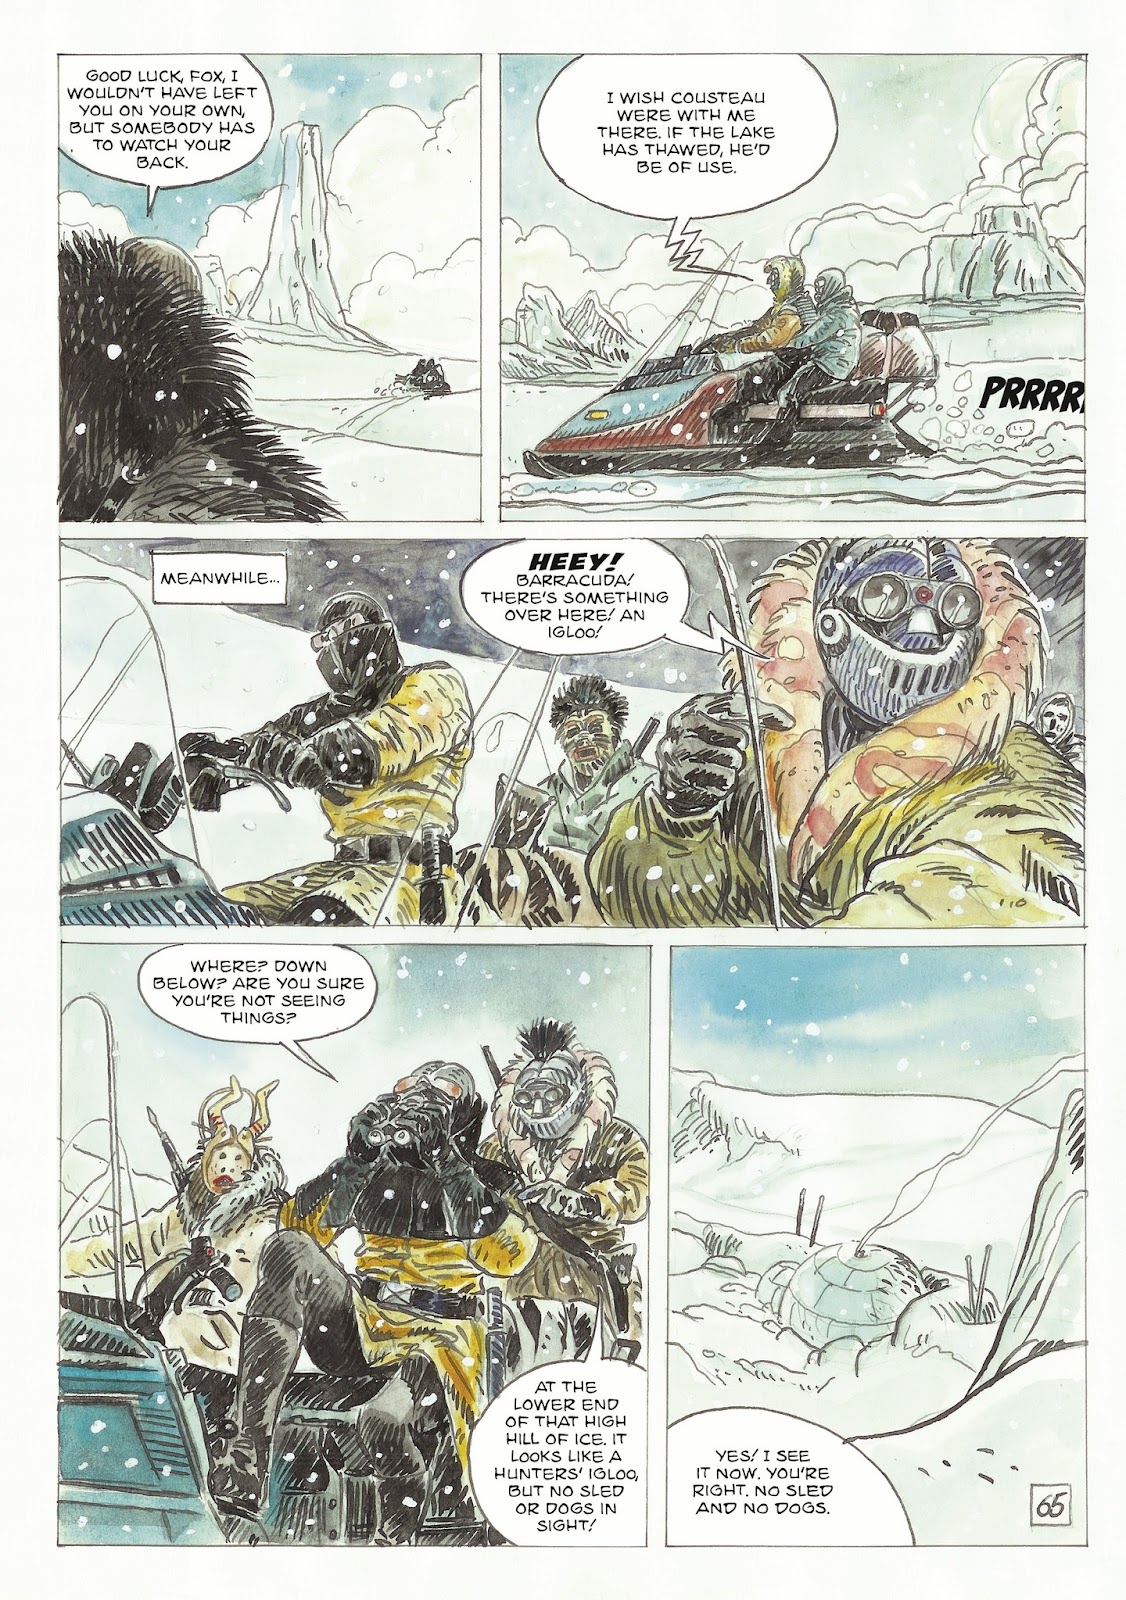 The Man With the Bear issue 2 - Page 11